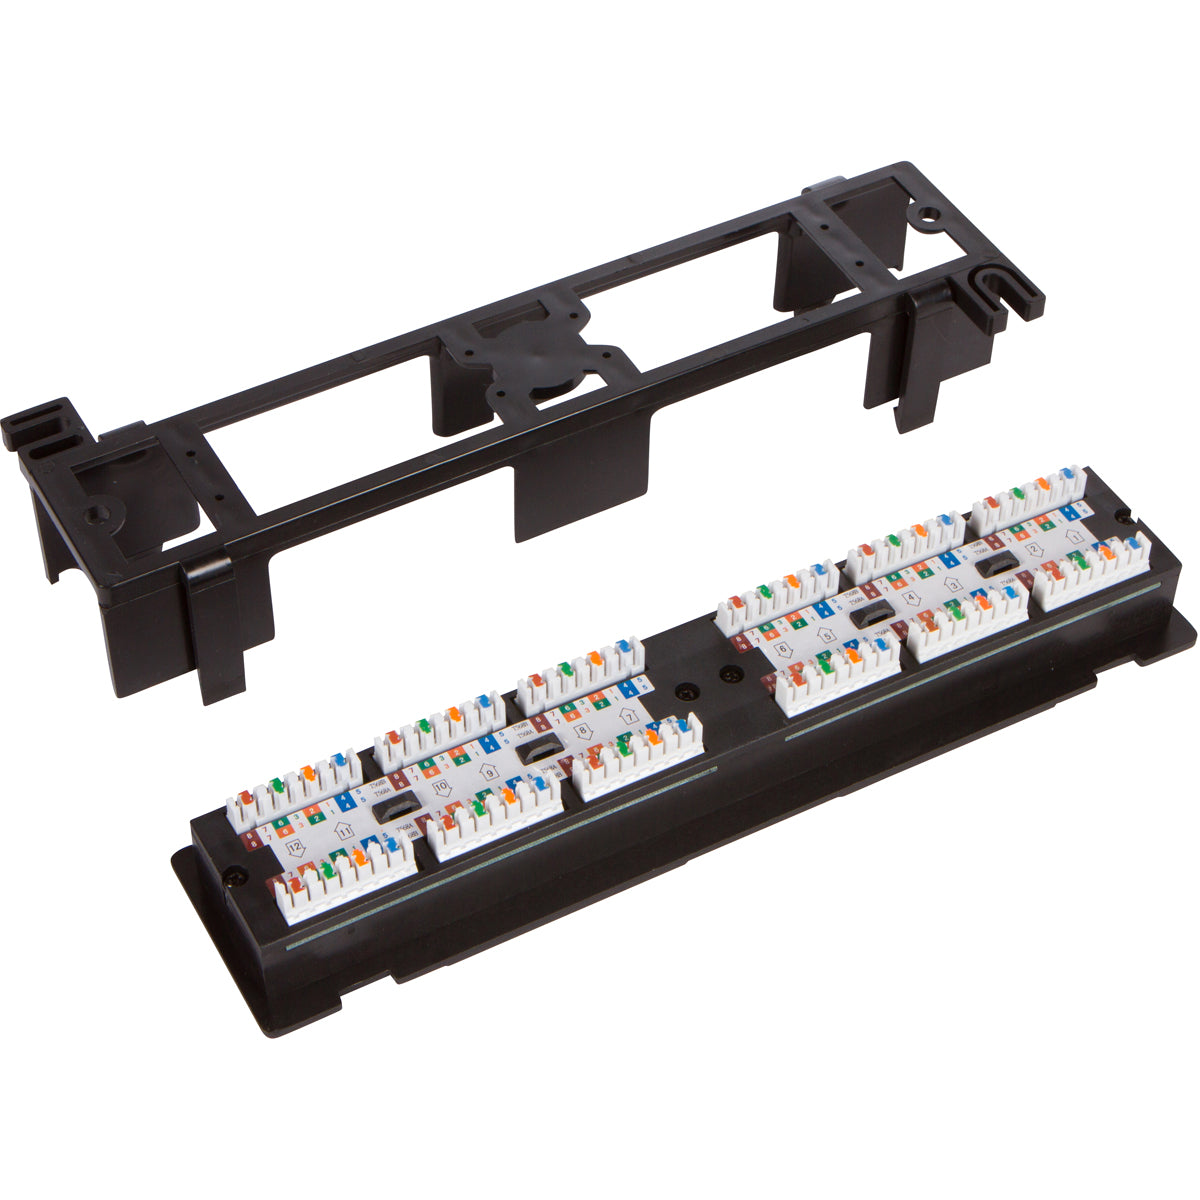 Buyer’s Point 12 Port UTP 10 inch Cat6 Network Wall Mount Surface Patch Panel - Milena International Inc